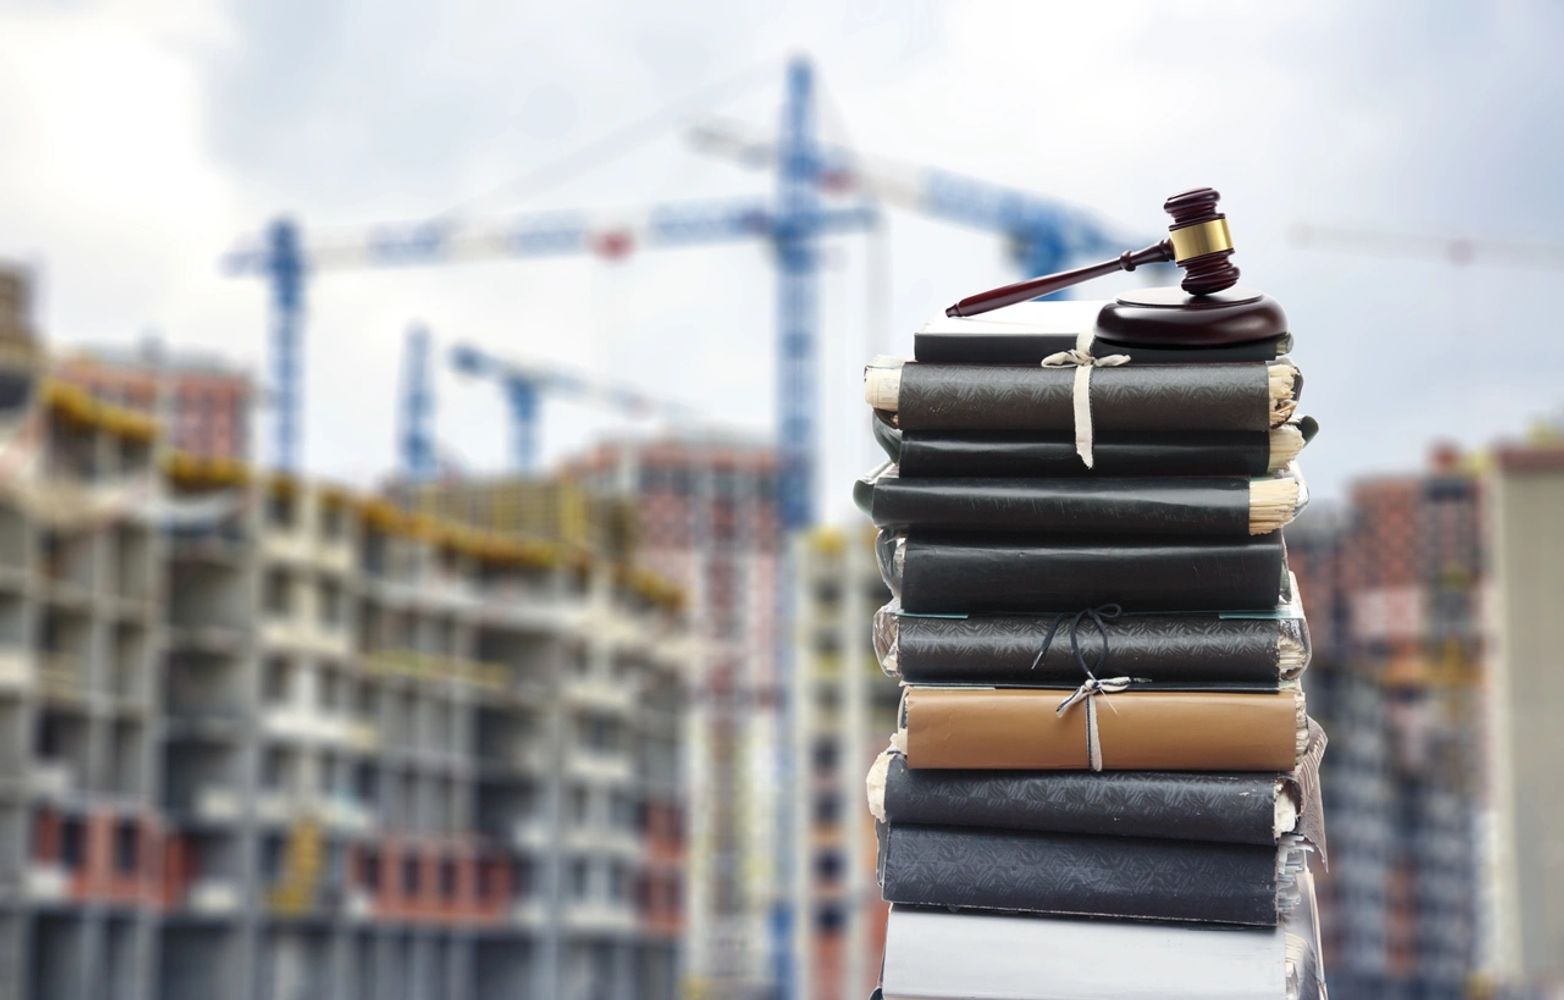 Smothers Law Firm specializes in construction, civil, real estate, business, and commercial law.